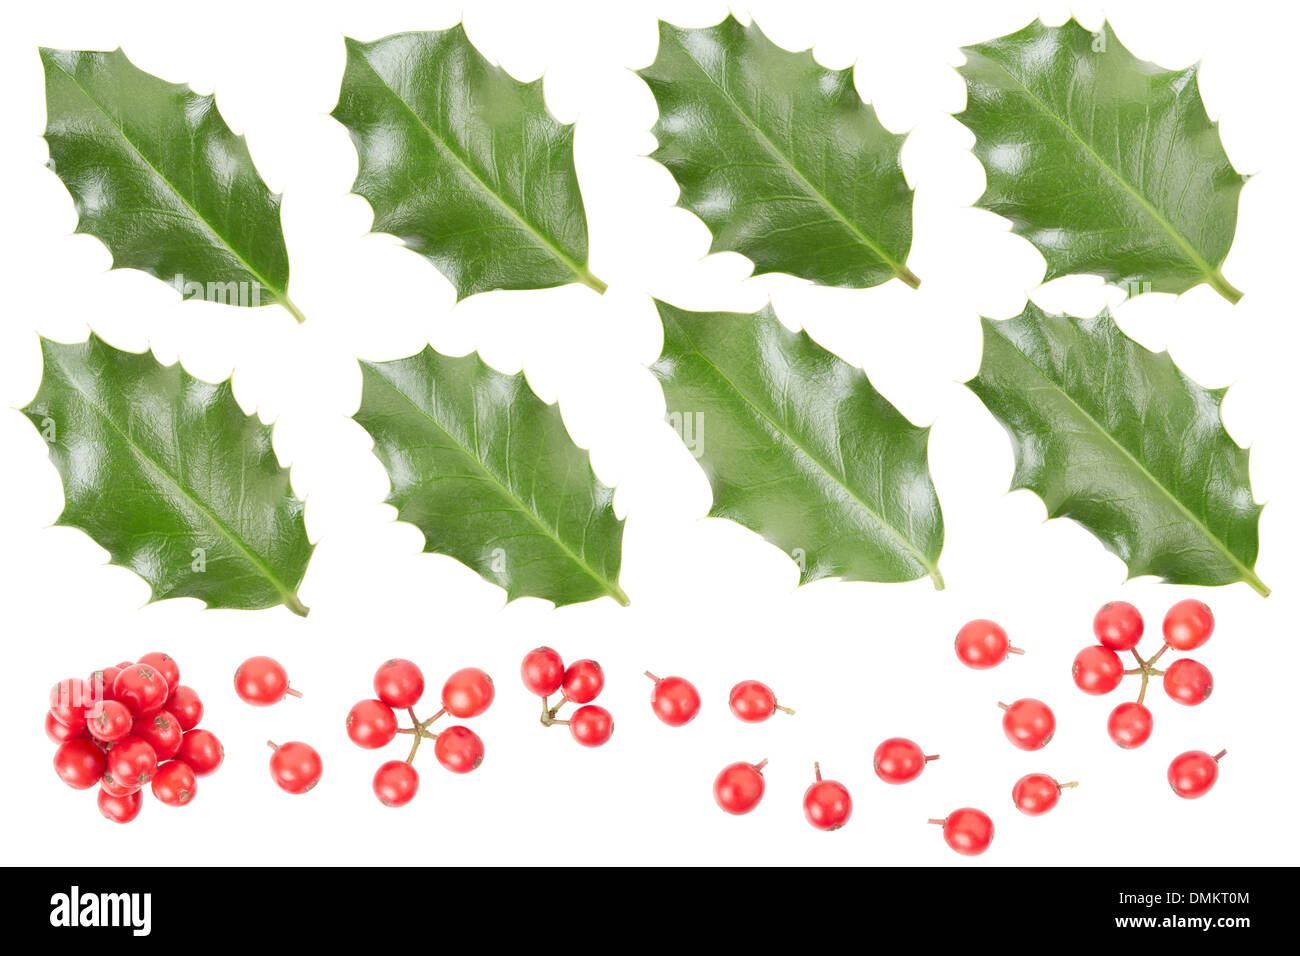 Holly leaves and berries collection isolated on white, clipping path included Stock Photo